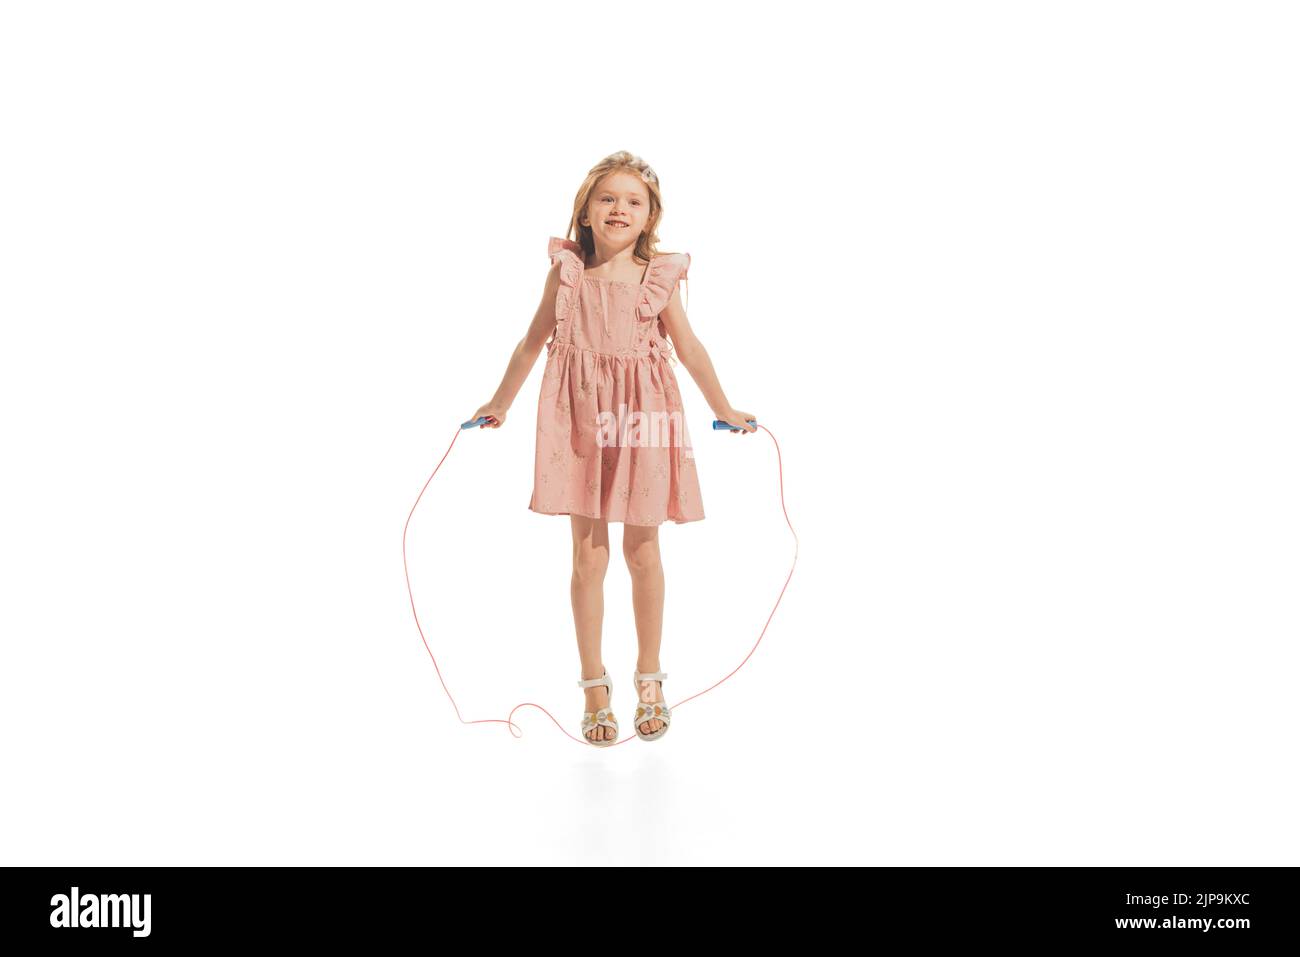 Portrait of beautiful little girl in stylish dress posing, jumping with rope, playing isolated over white studio background Stock Photo